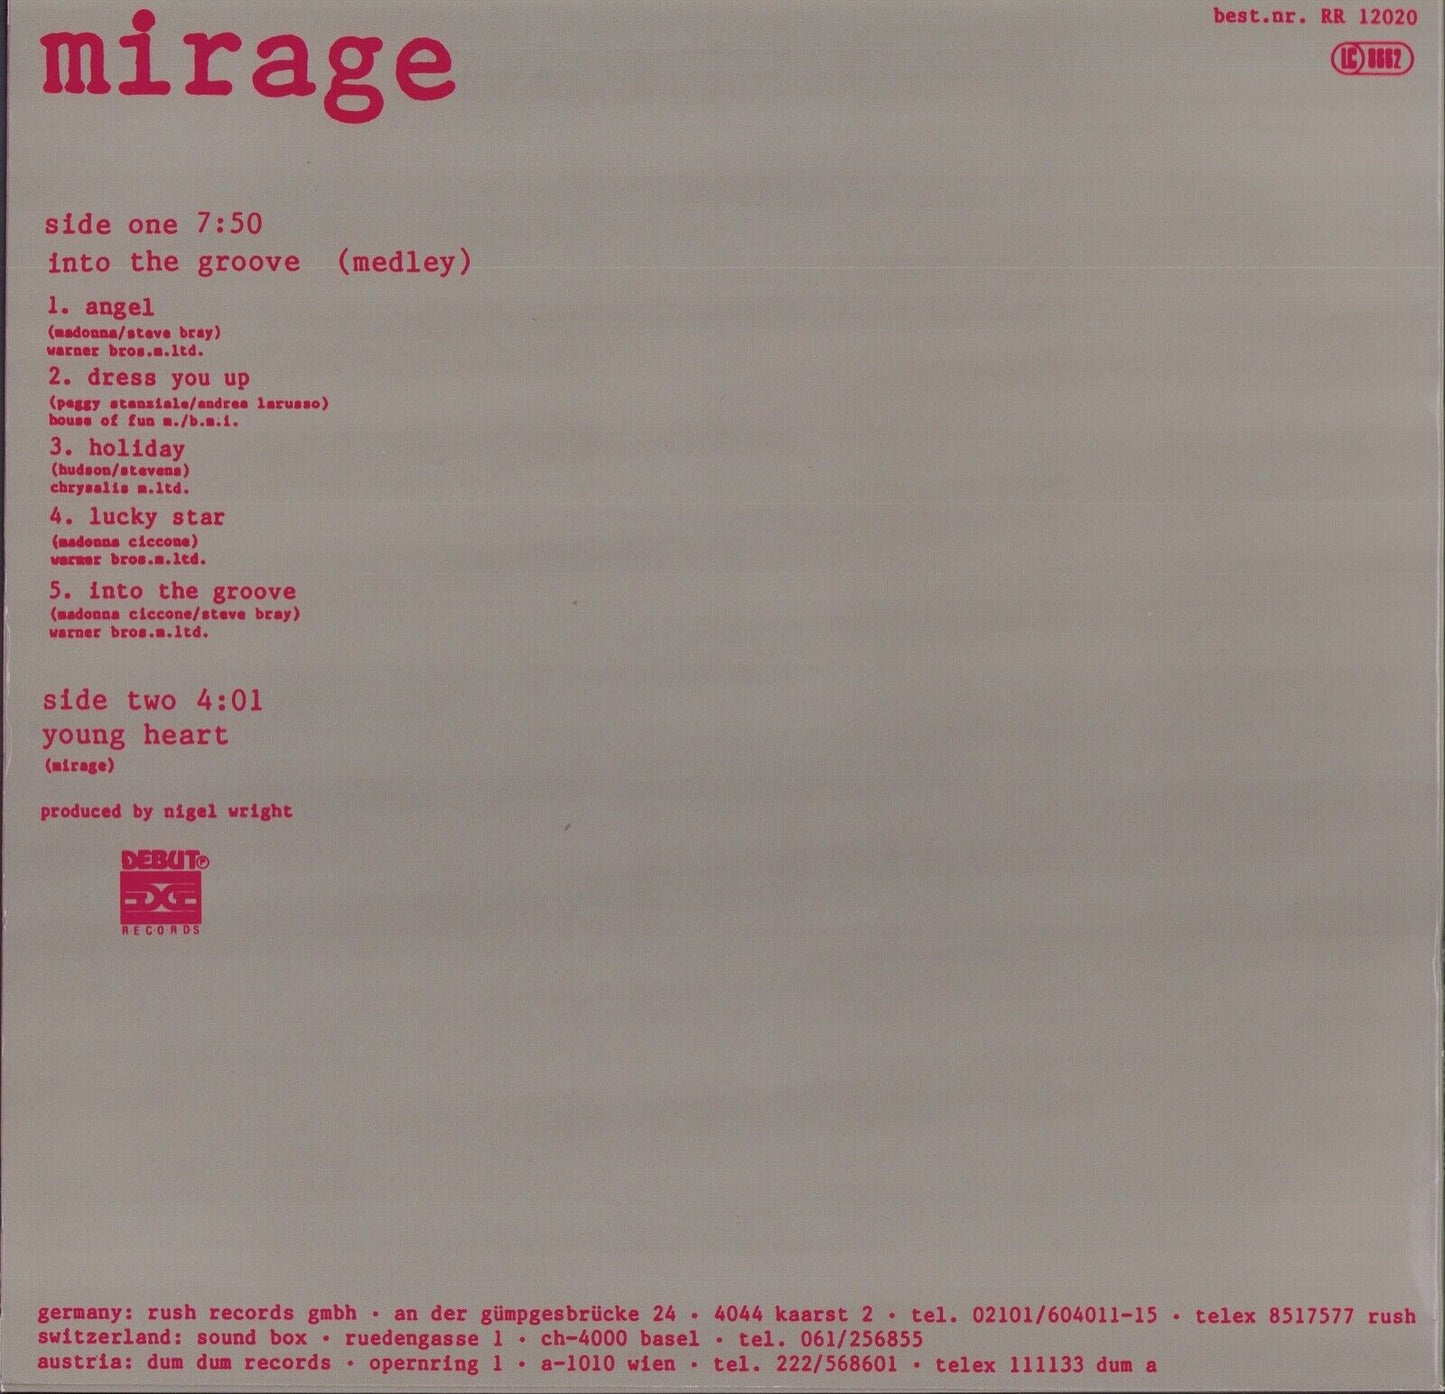 Mirage - Into The Groove Medley Vinyl 12"